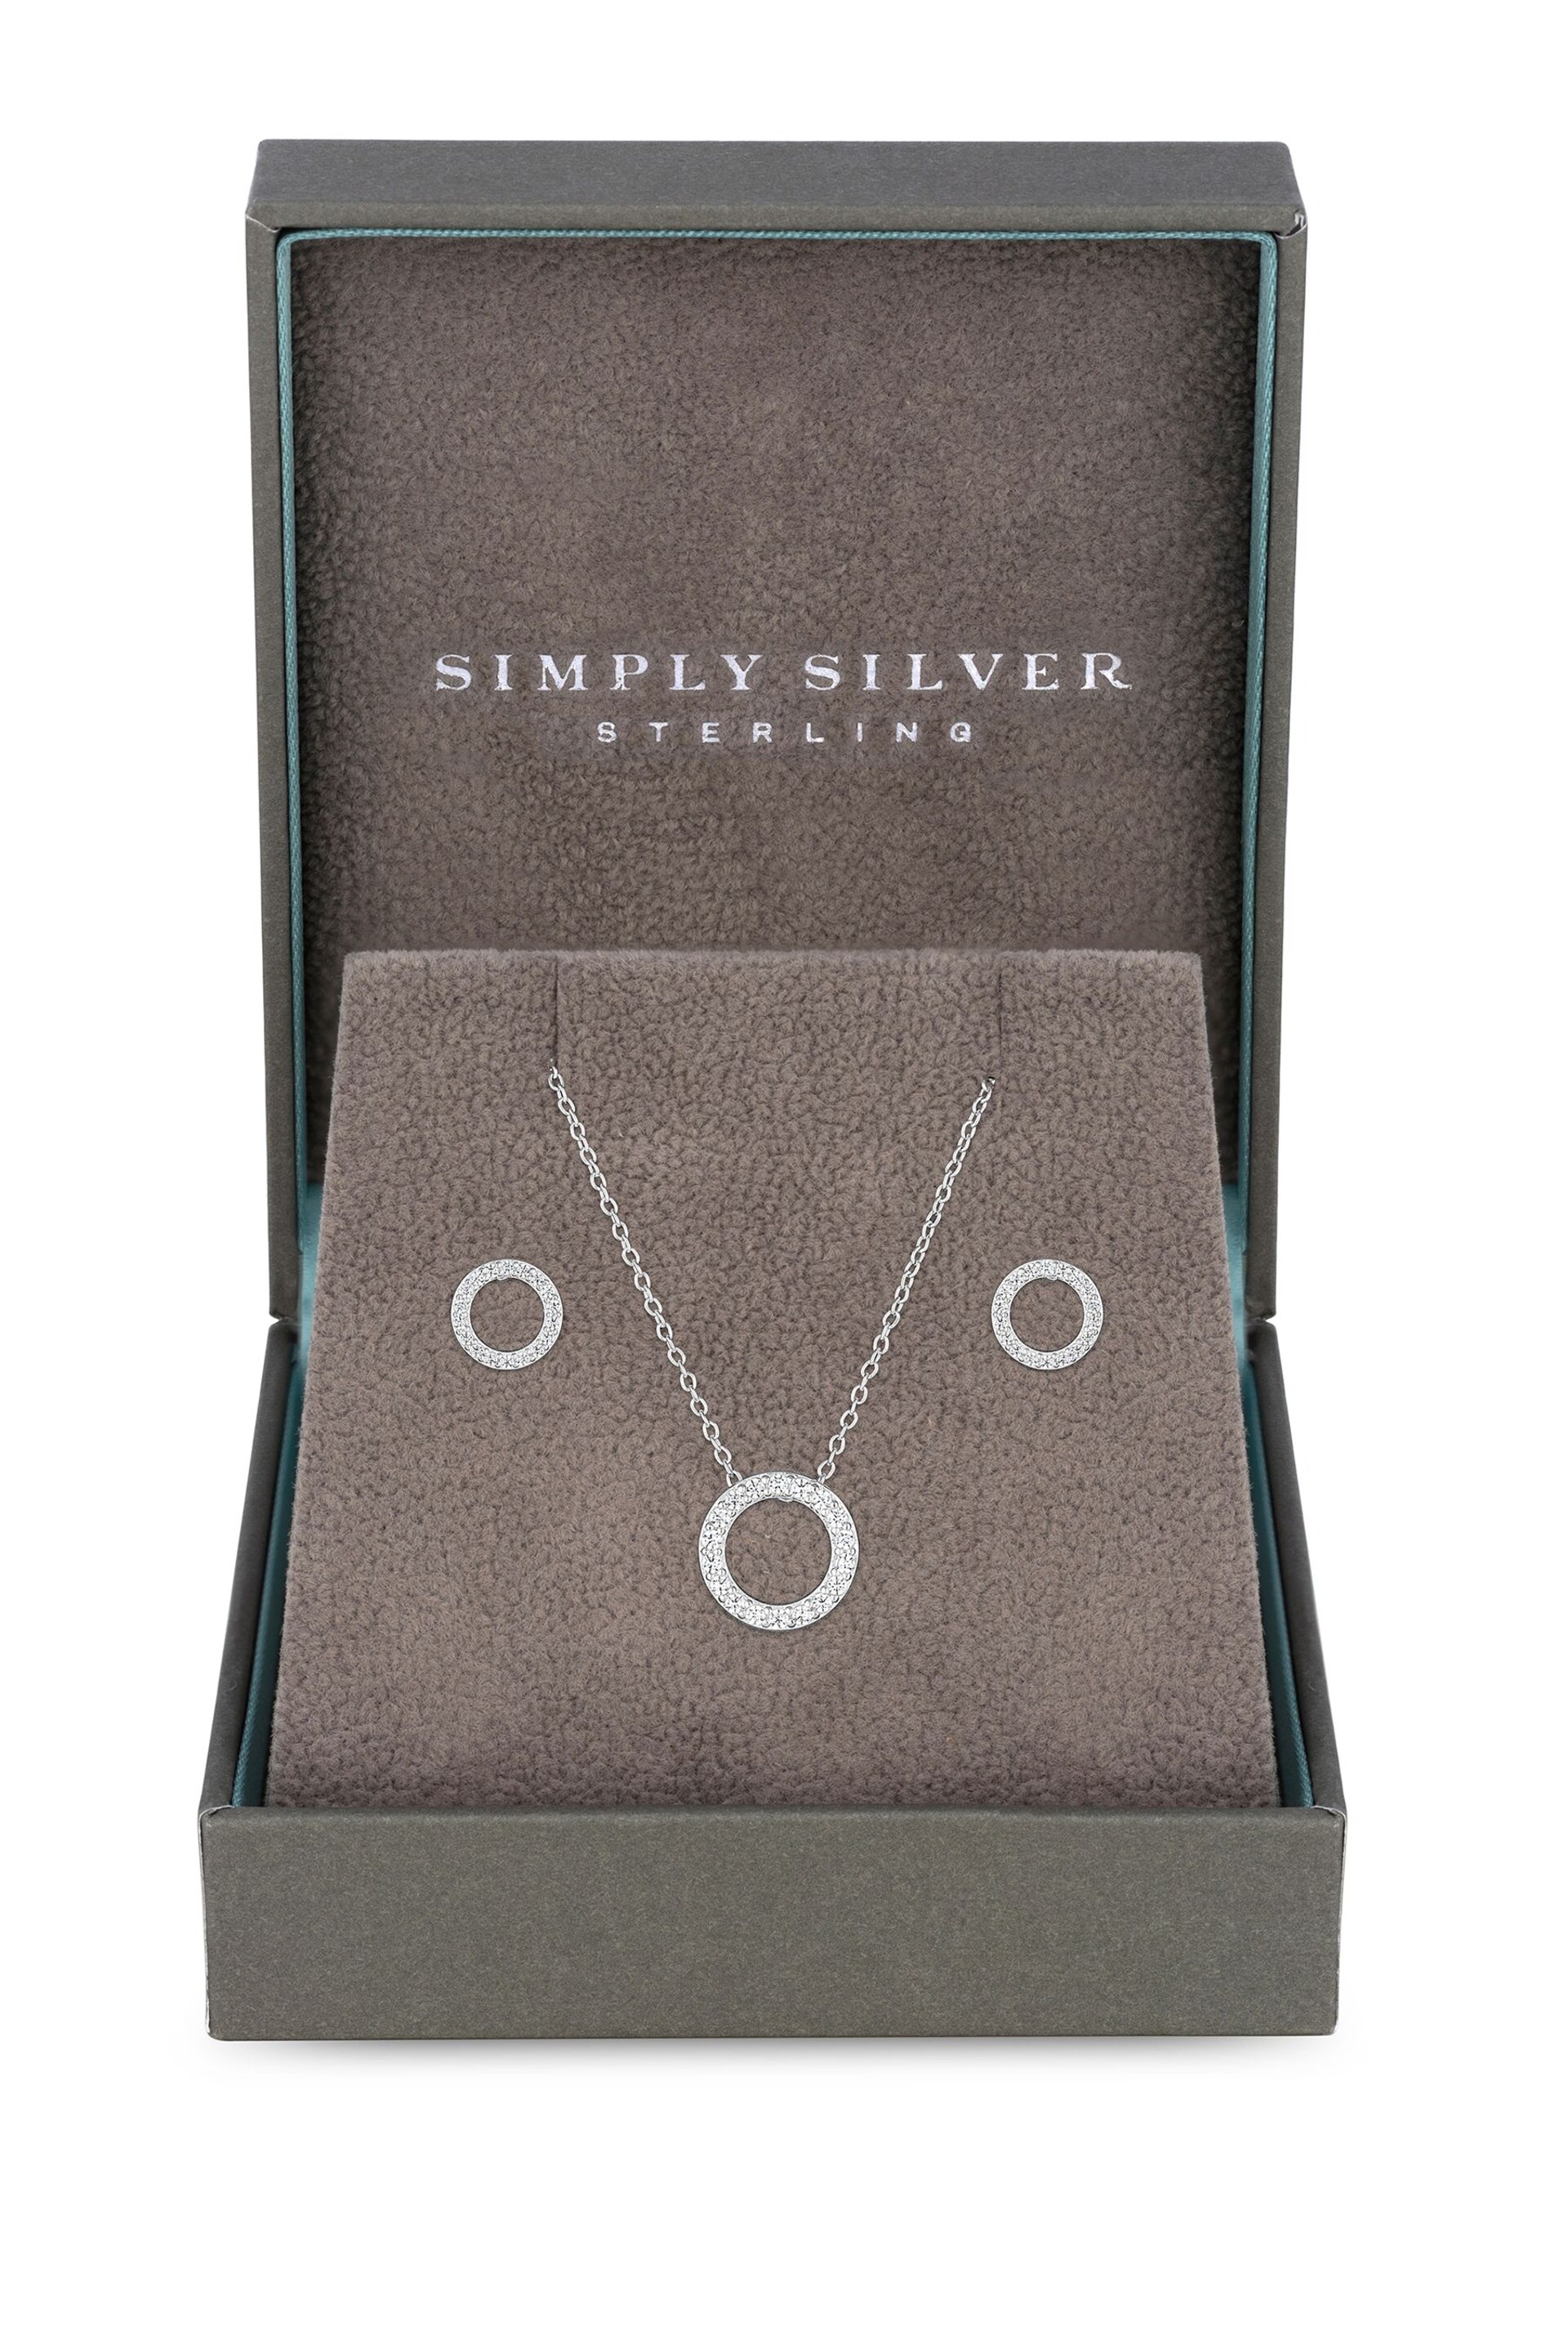 Simply Silver Sterling Silver Tone 925 Cubic Zirconia Round Open Set - Gift Boxed - Image 2 of 2